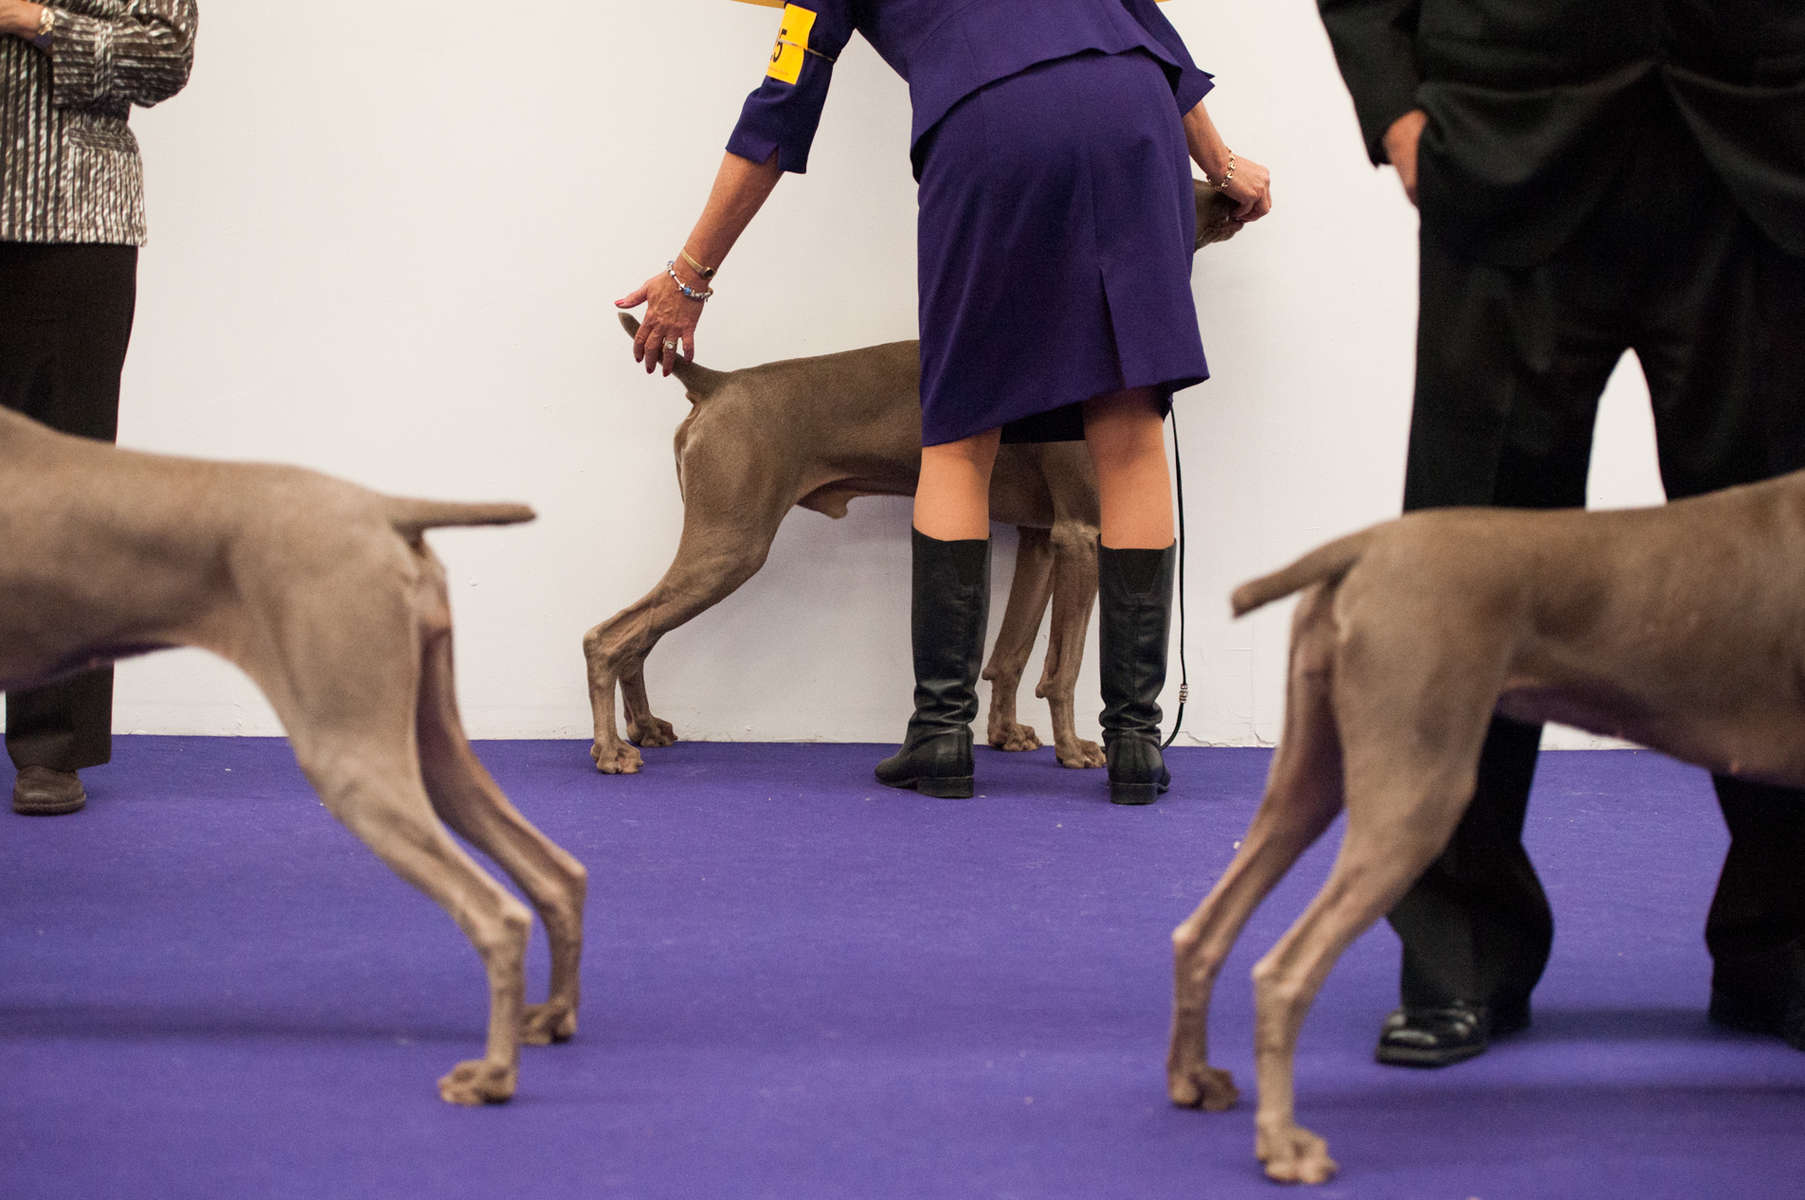 Weimaraners practice their posture and pointing before heading to the ring at the 137th Westminster Kennel Club Dog Show in Manhattan. (Feb. 12, 2013)Photo by Nancy Borowick